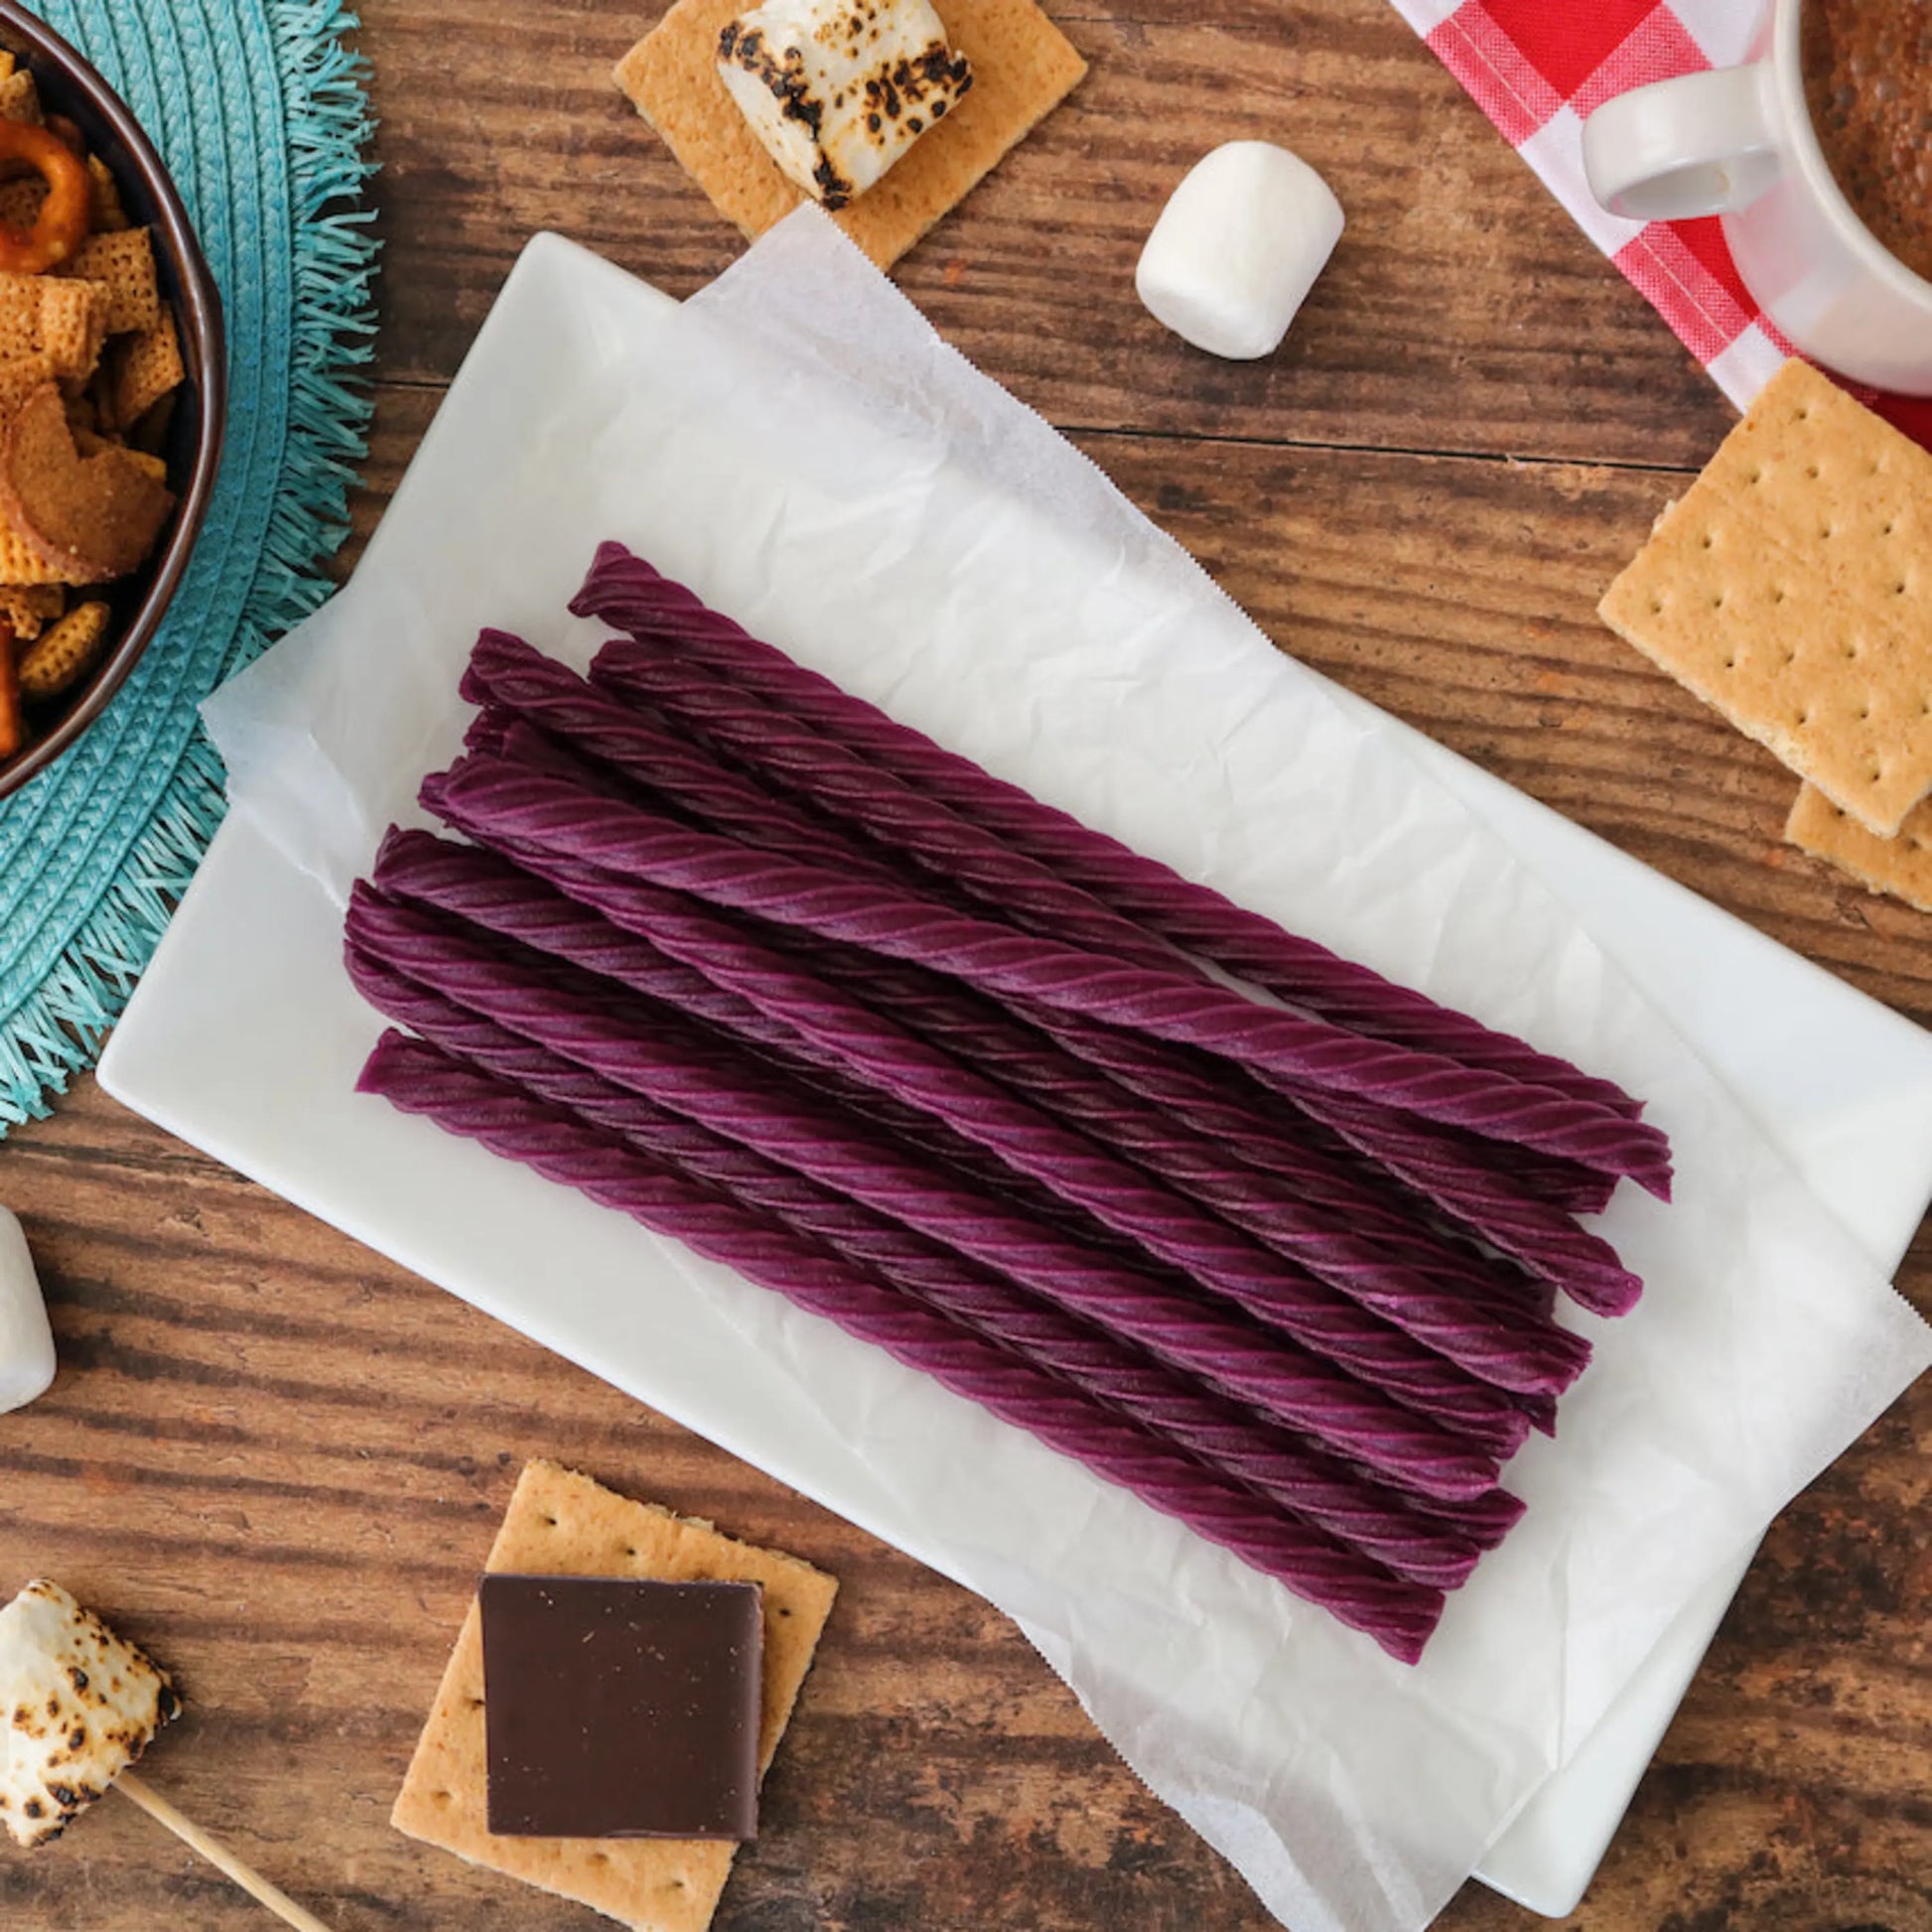 Red Vines Grape Licorice Twists alongside s'mores supplies